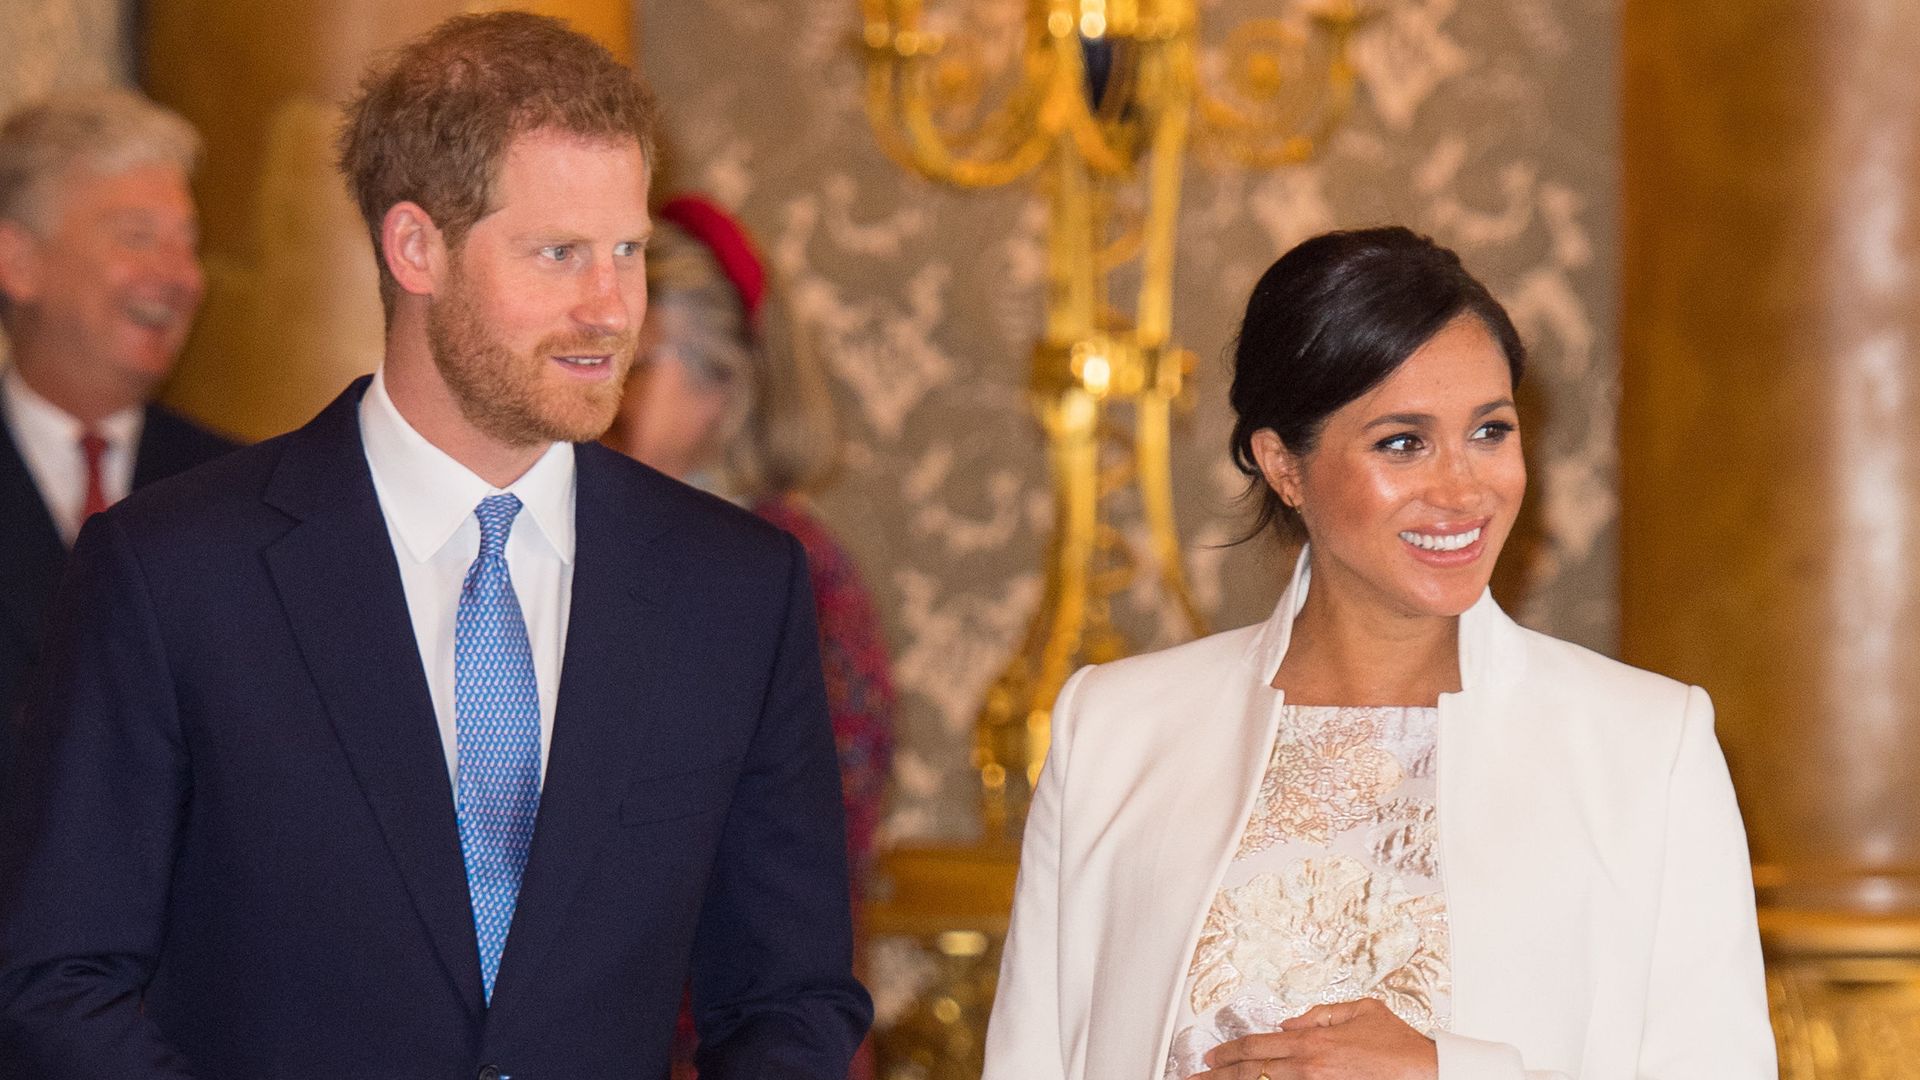 Prince Harry and Meghan Markle at Buckingham Palace in March 2019